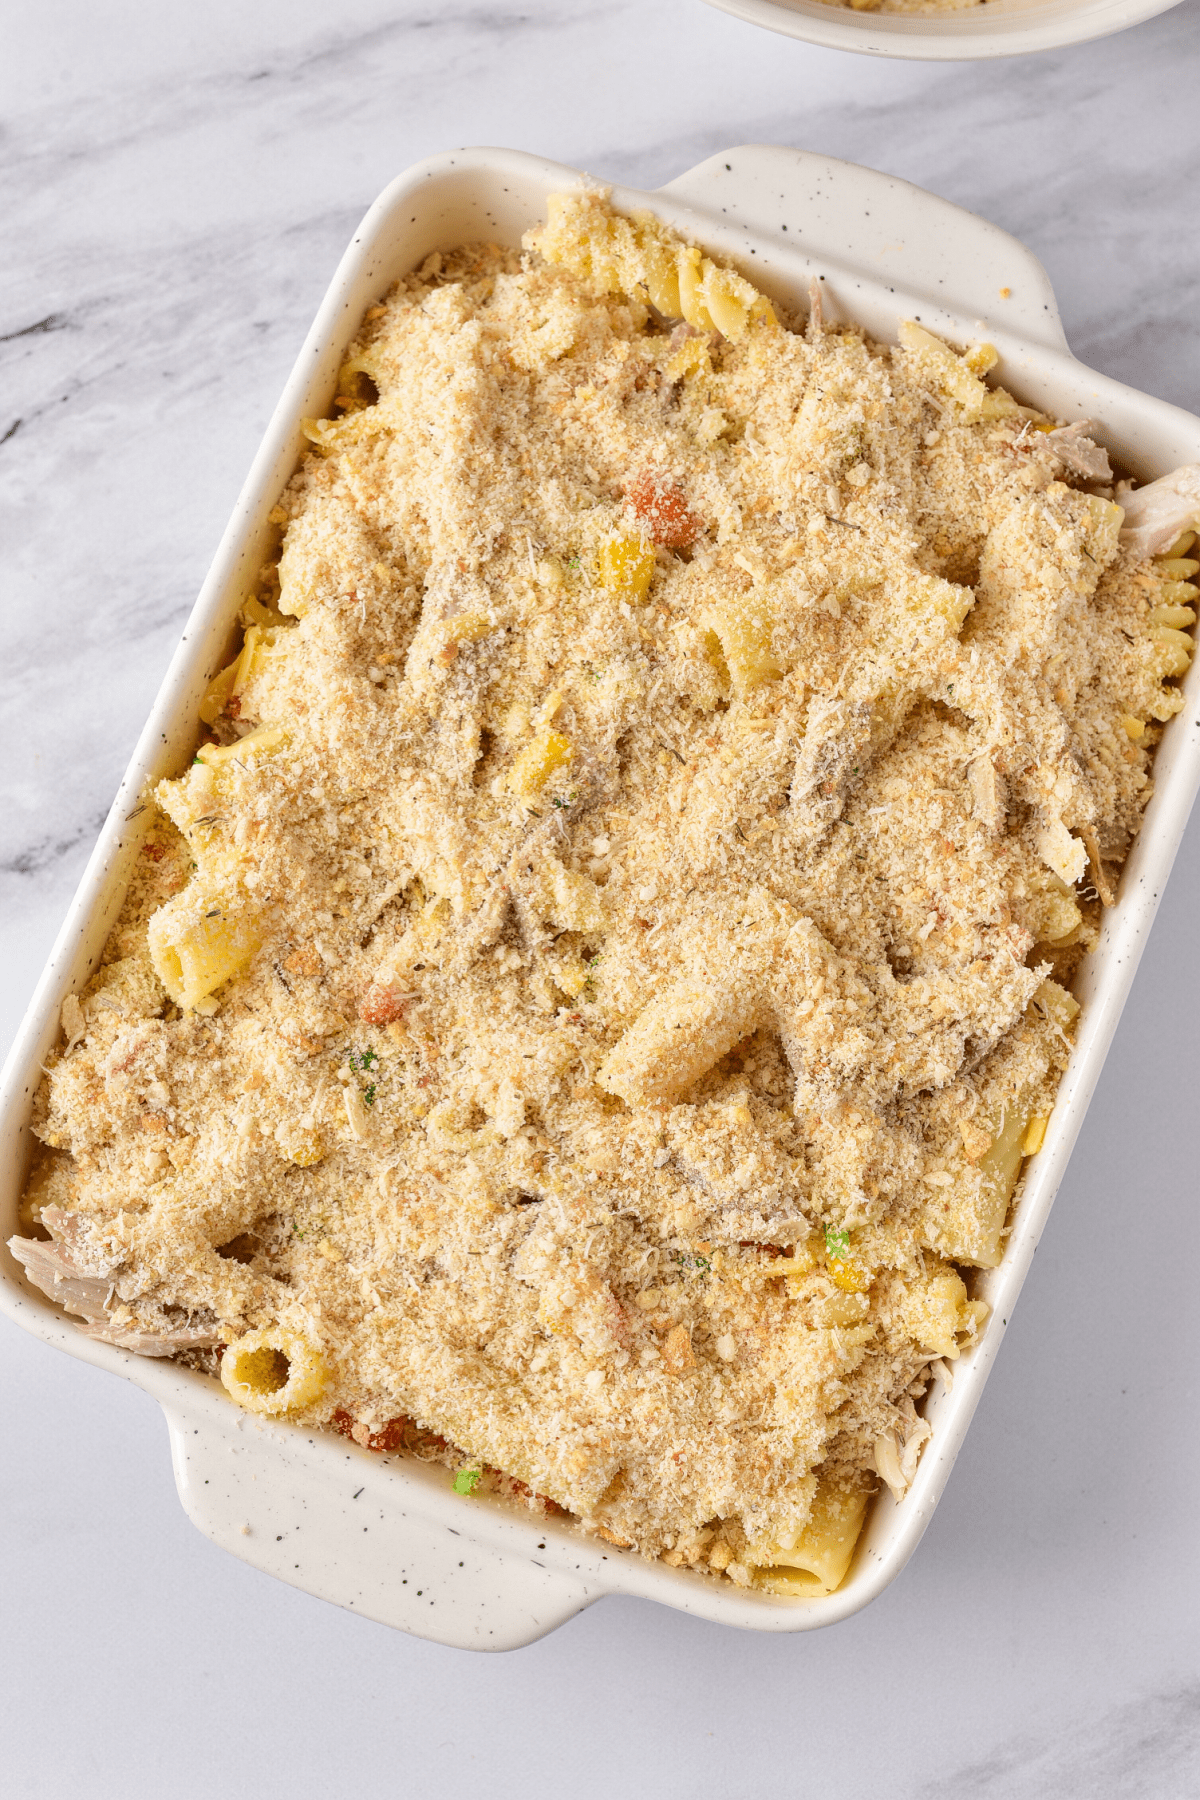 Turkey pasta bake topped with breadcrumbs